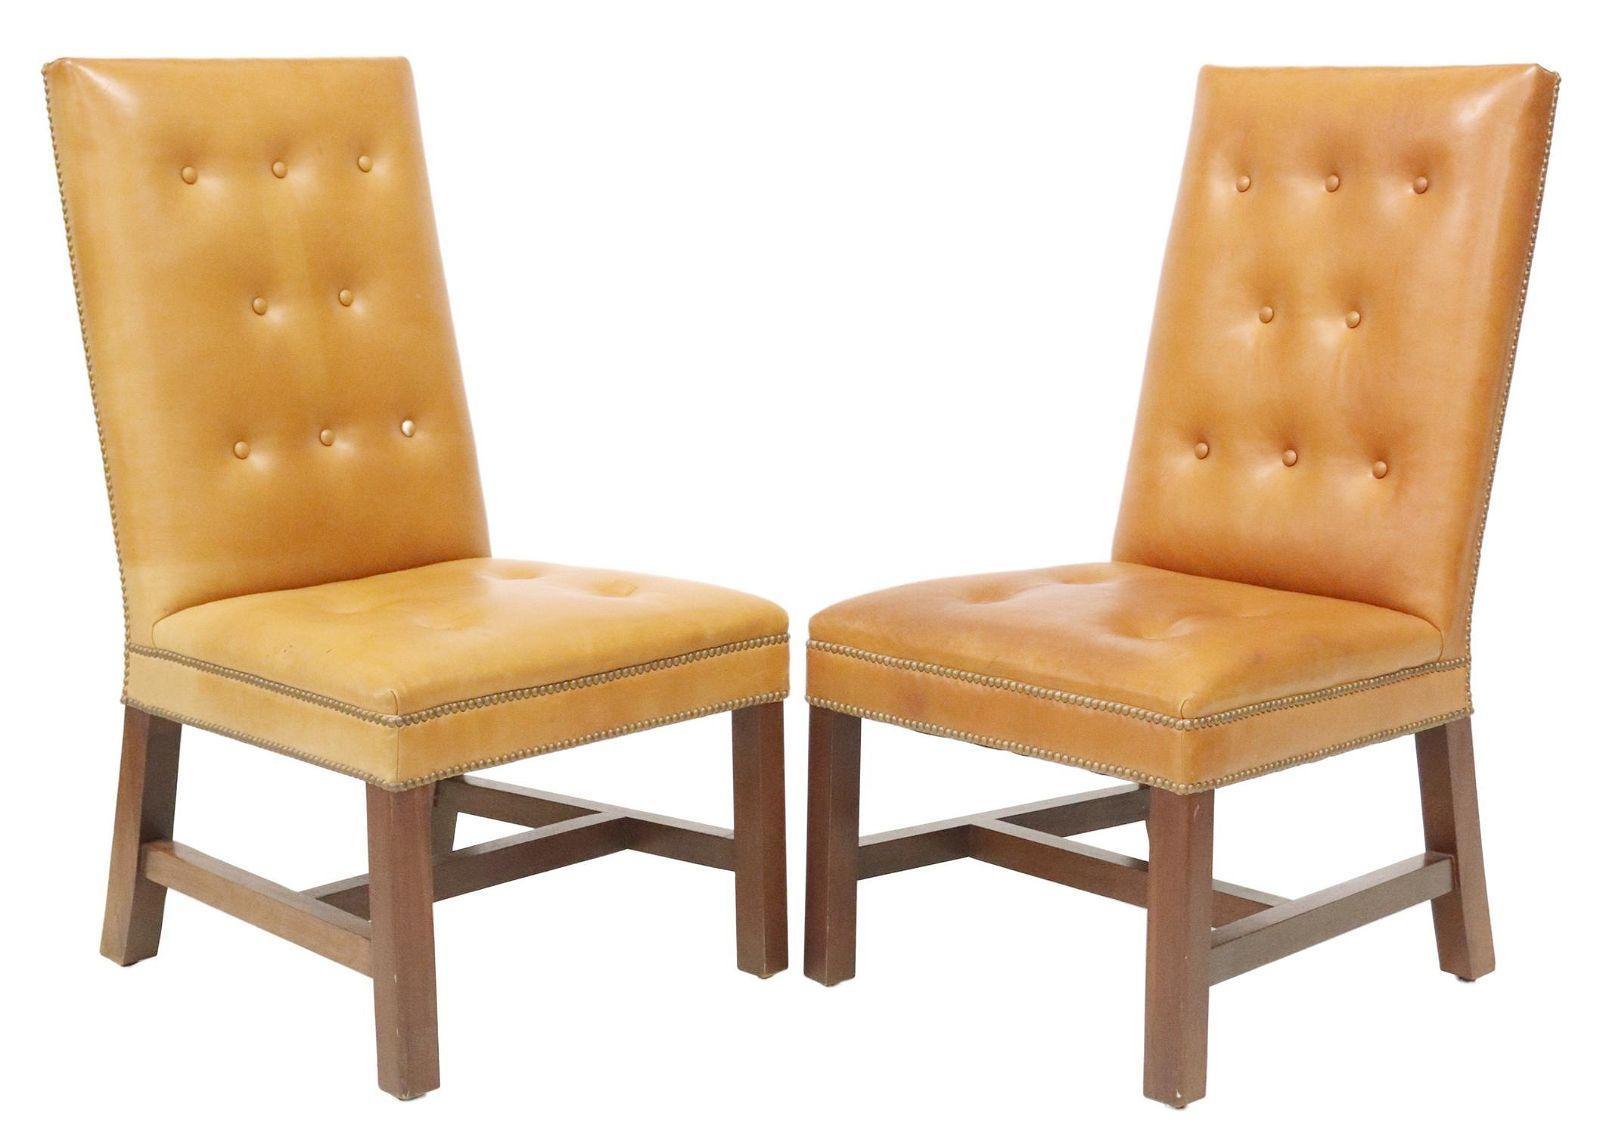 Great set of highback dining chairs by Ralph Lauren for Henredon. Upholstered in a rich and soft camel color leather leather. Each having padded back and seat in button-tufted tan leather upholstery, nailhead trim, rising on squared wood supports,